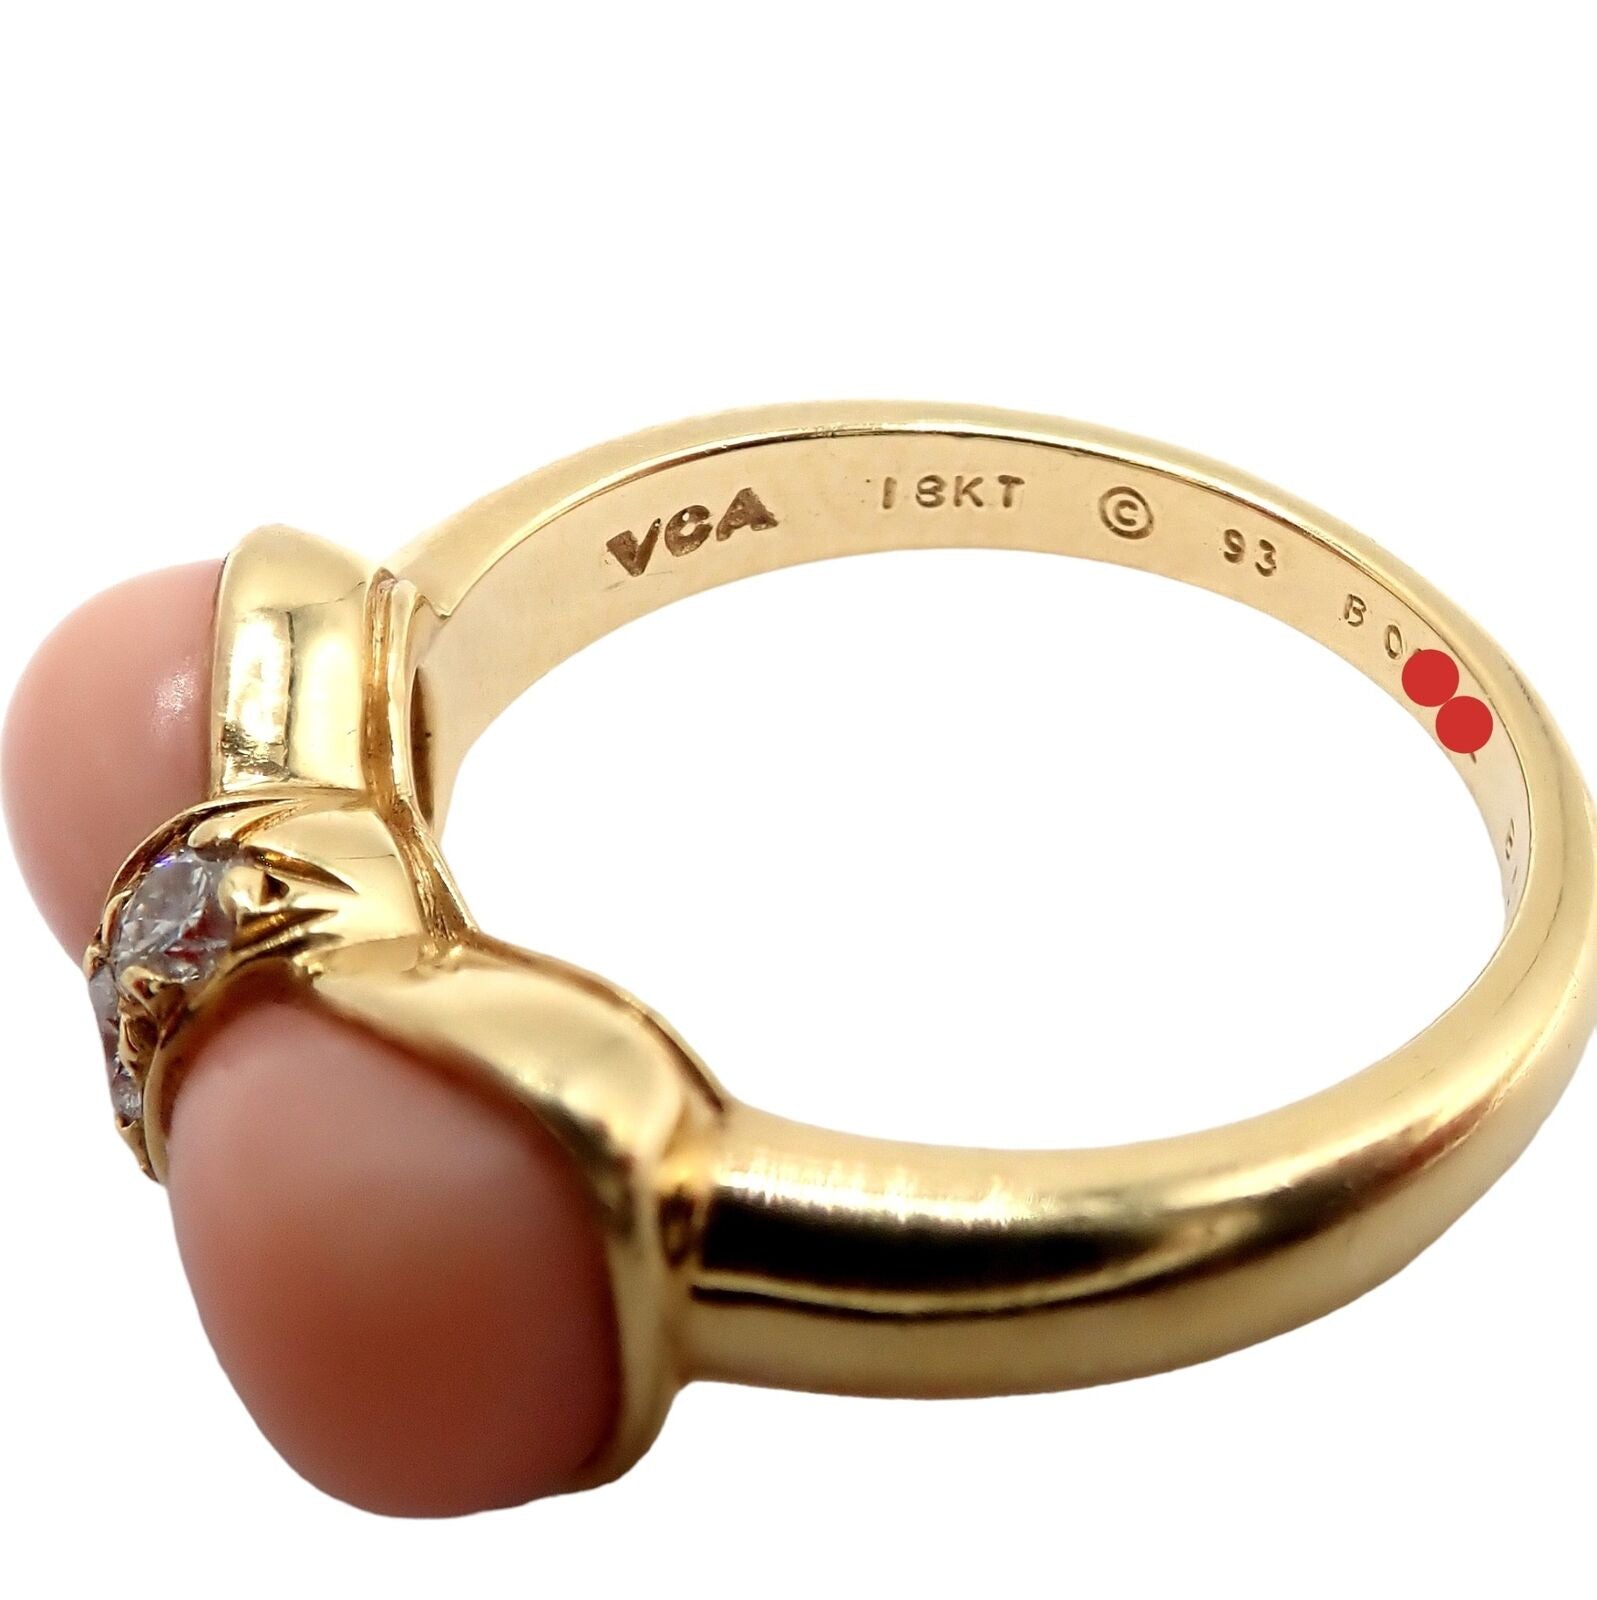 Van Cleef & Arpels Jewelry & Watches:Fine Jewelry:Rings Rare! Authentic Van Cleef & Arpels 18k Yellow Gold Coral Diamond Bow Ring sz 5